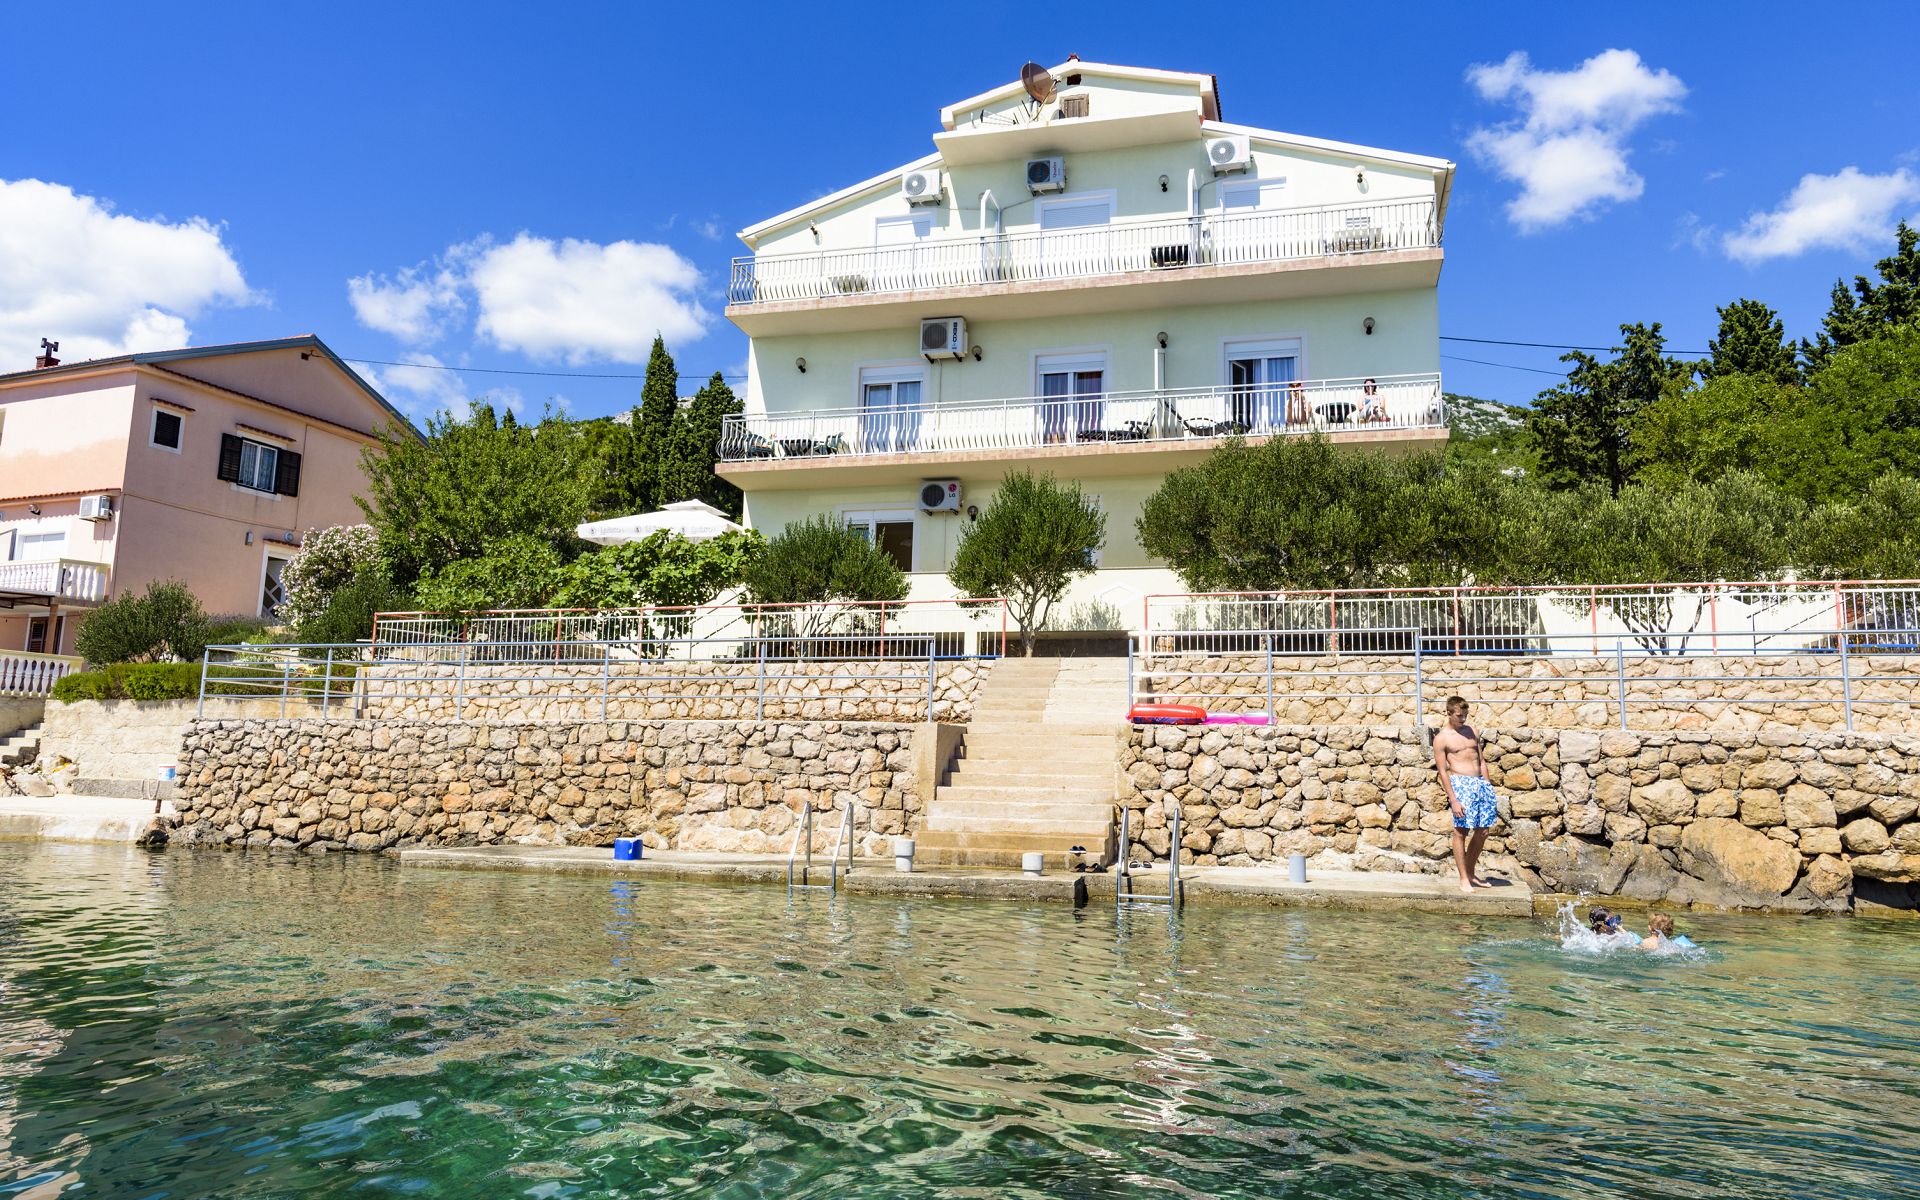 Apartment Toma - 5m from the sea with parking: A1 Lukovo Sugarje, Riviera Senj 0